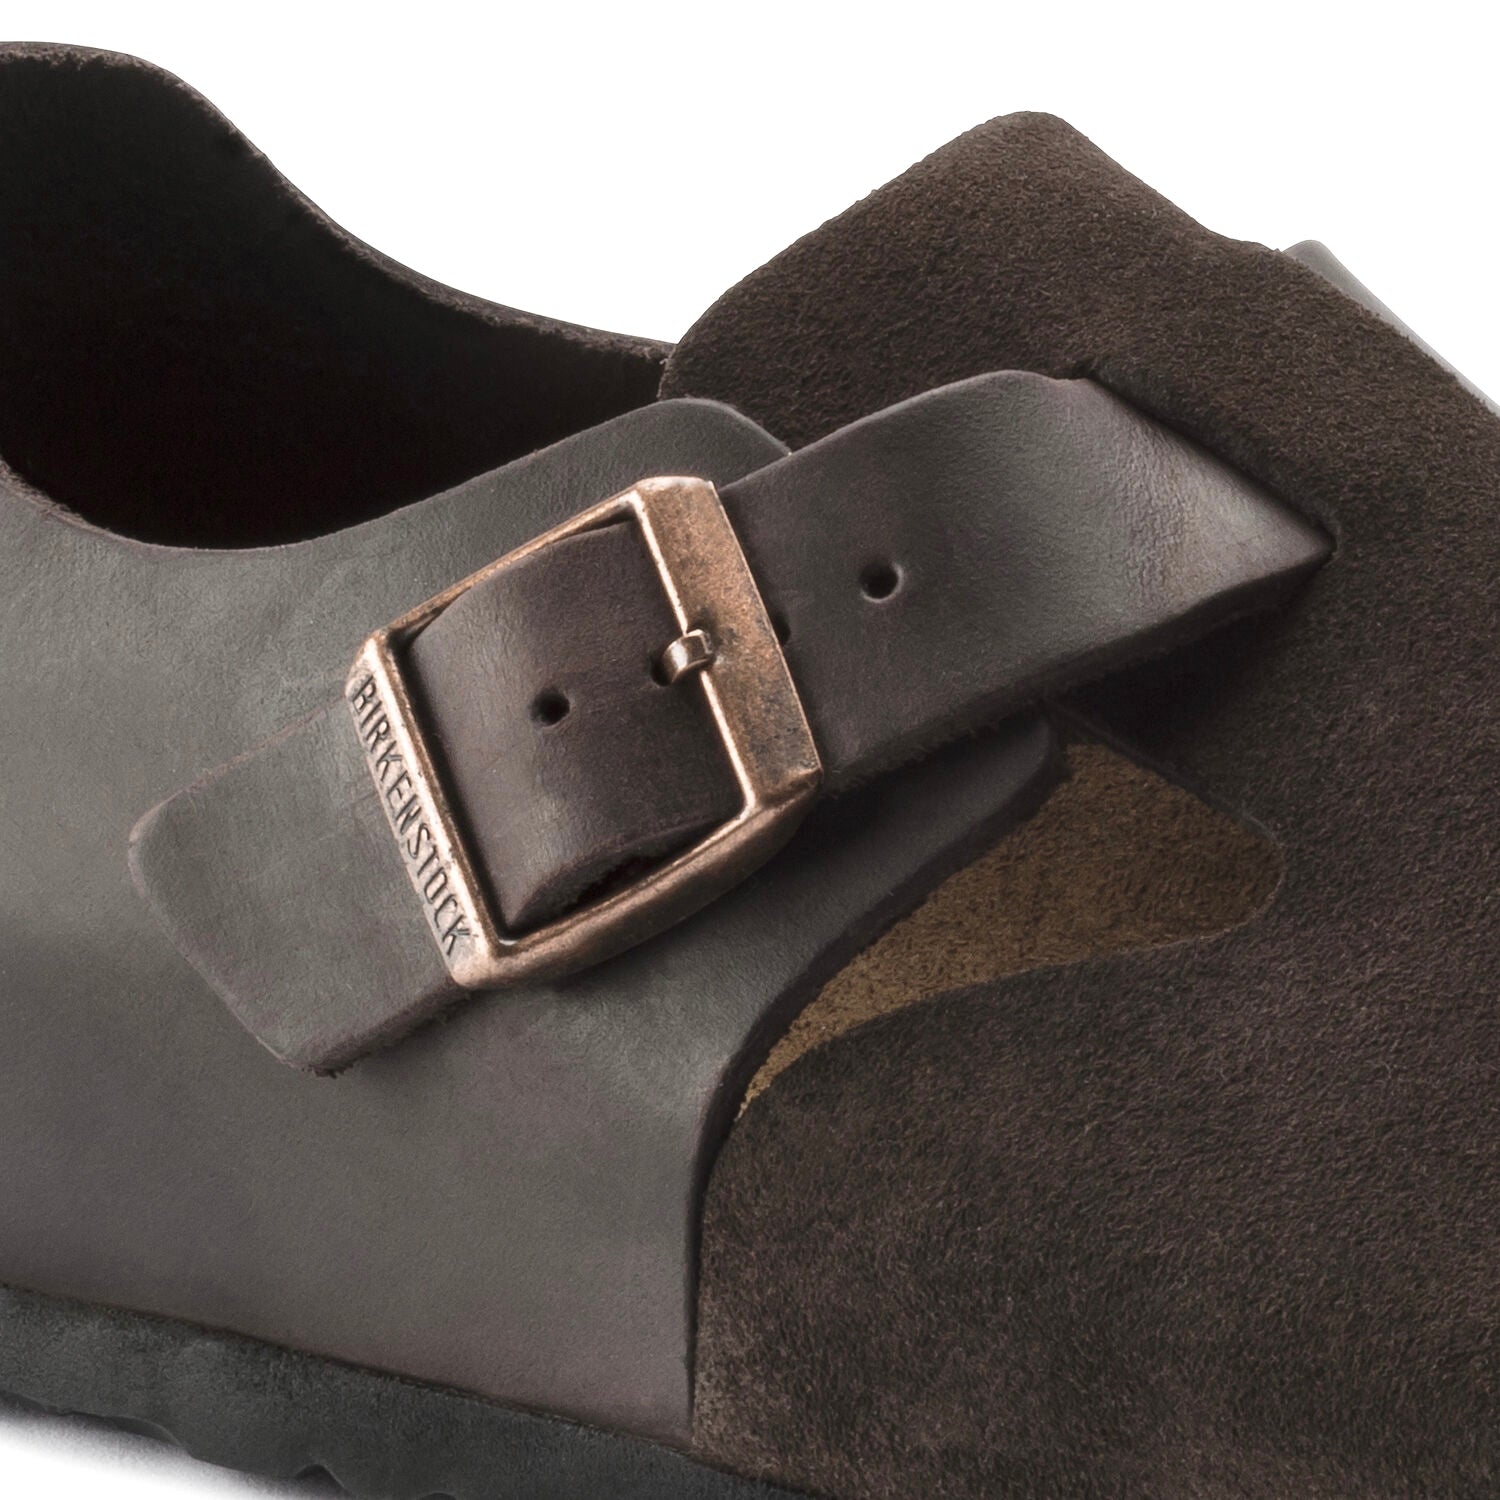 Birkenstock London Ebony Brown Oiled Leather Suede Leather Classic Footbed